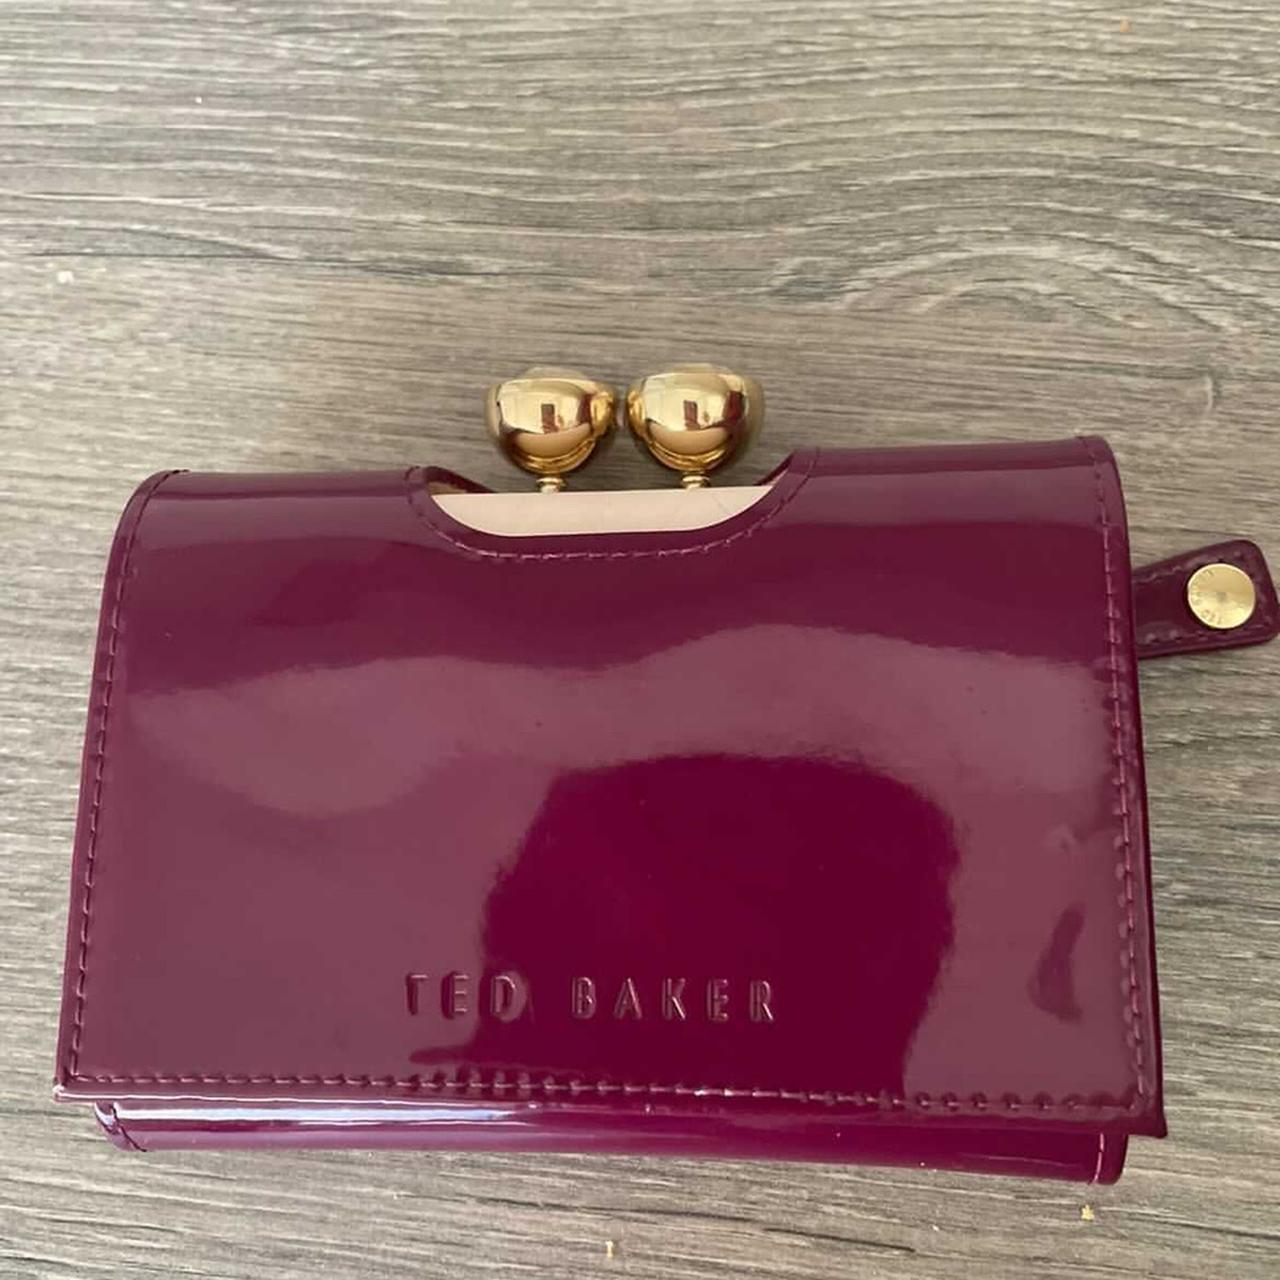 ted baker small purse | Ted baker london bags, Ted baker bag, Small purse